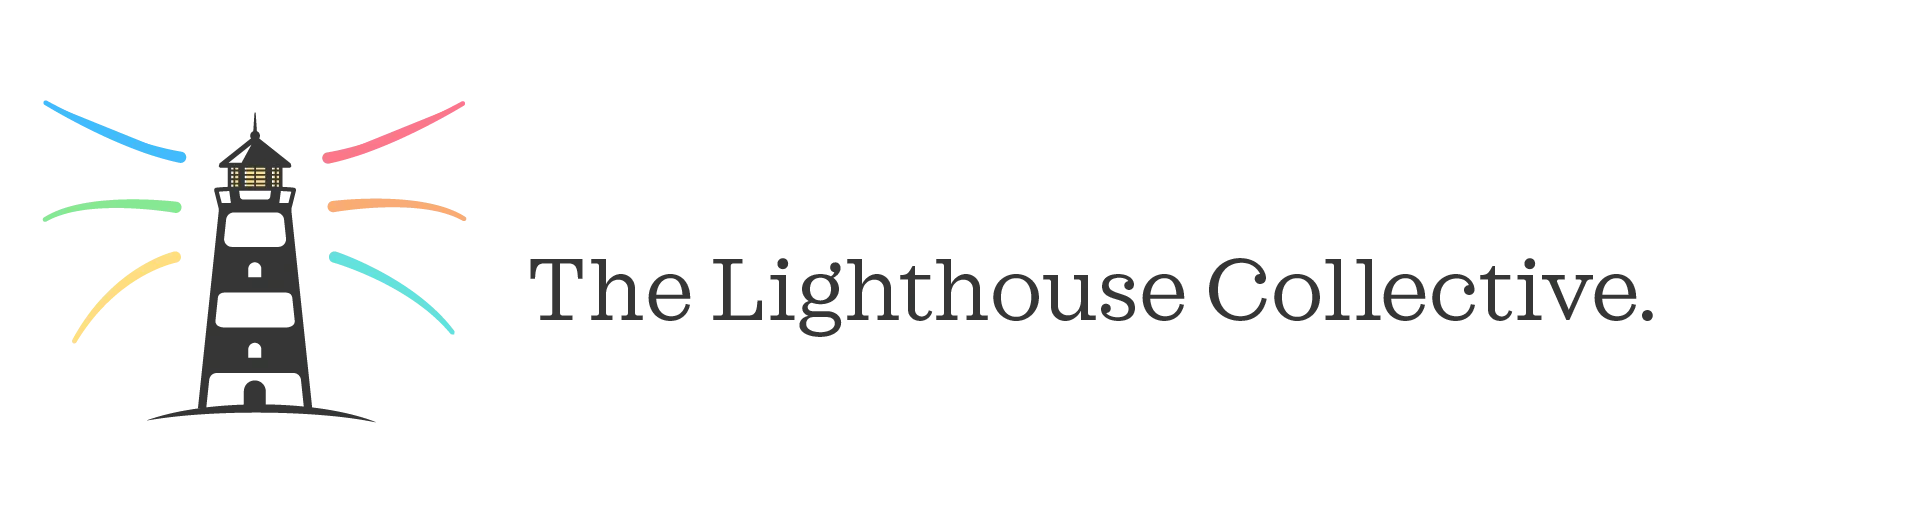 The Lighthouse Collective Artboard 7-0001